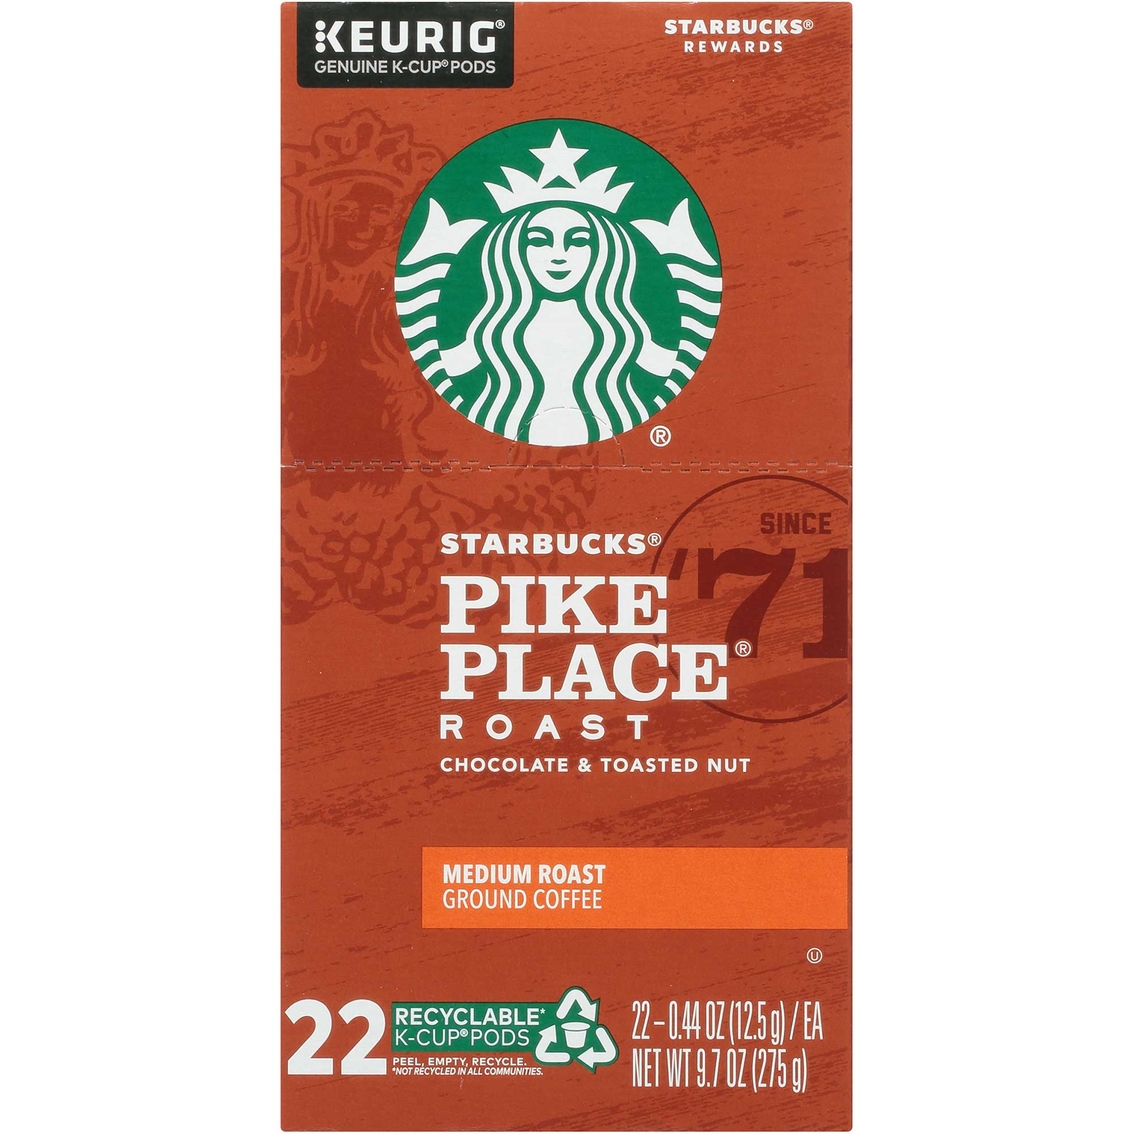 Starbucks K-Cup Pike Place Roast Coffee Pods 22 ct. - Image 2 of 6